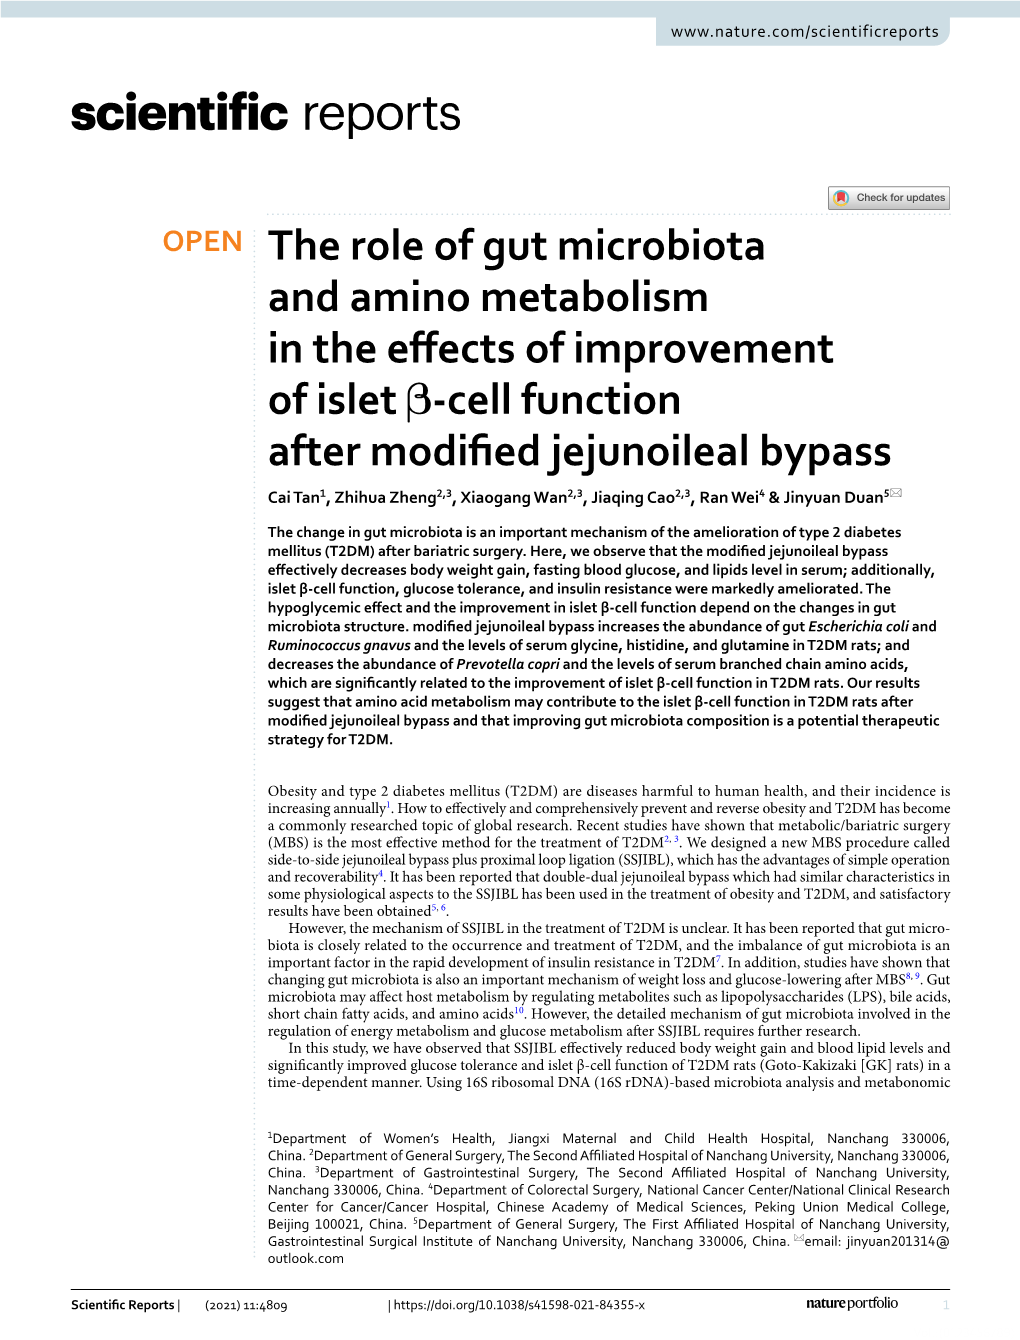 The Role of Gut Microbiota and Amino Metabolism in the Effects Of